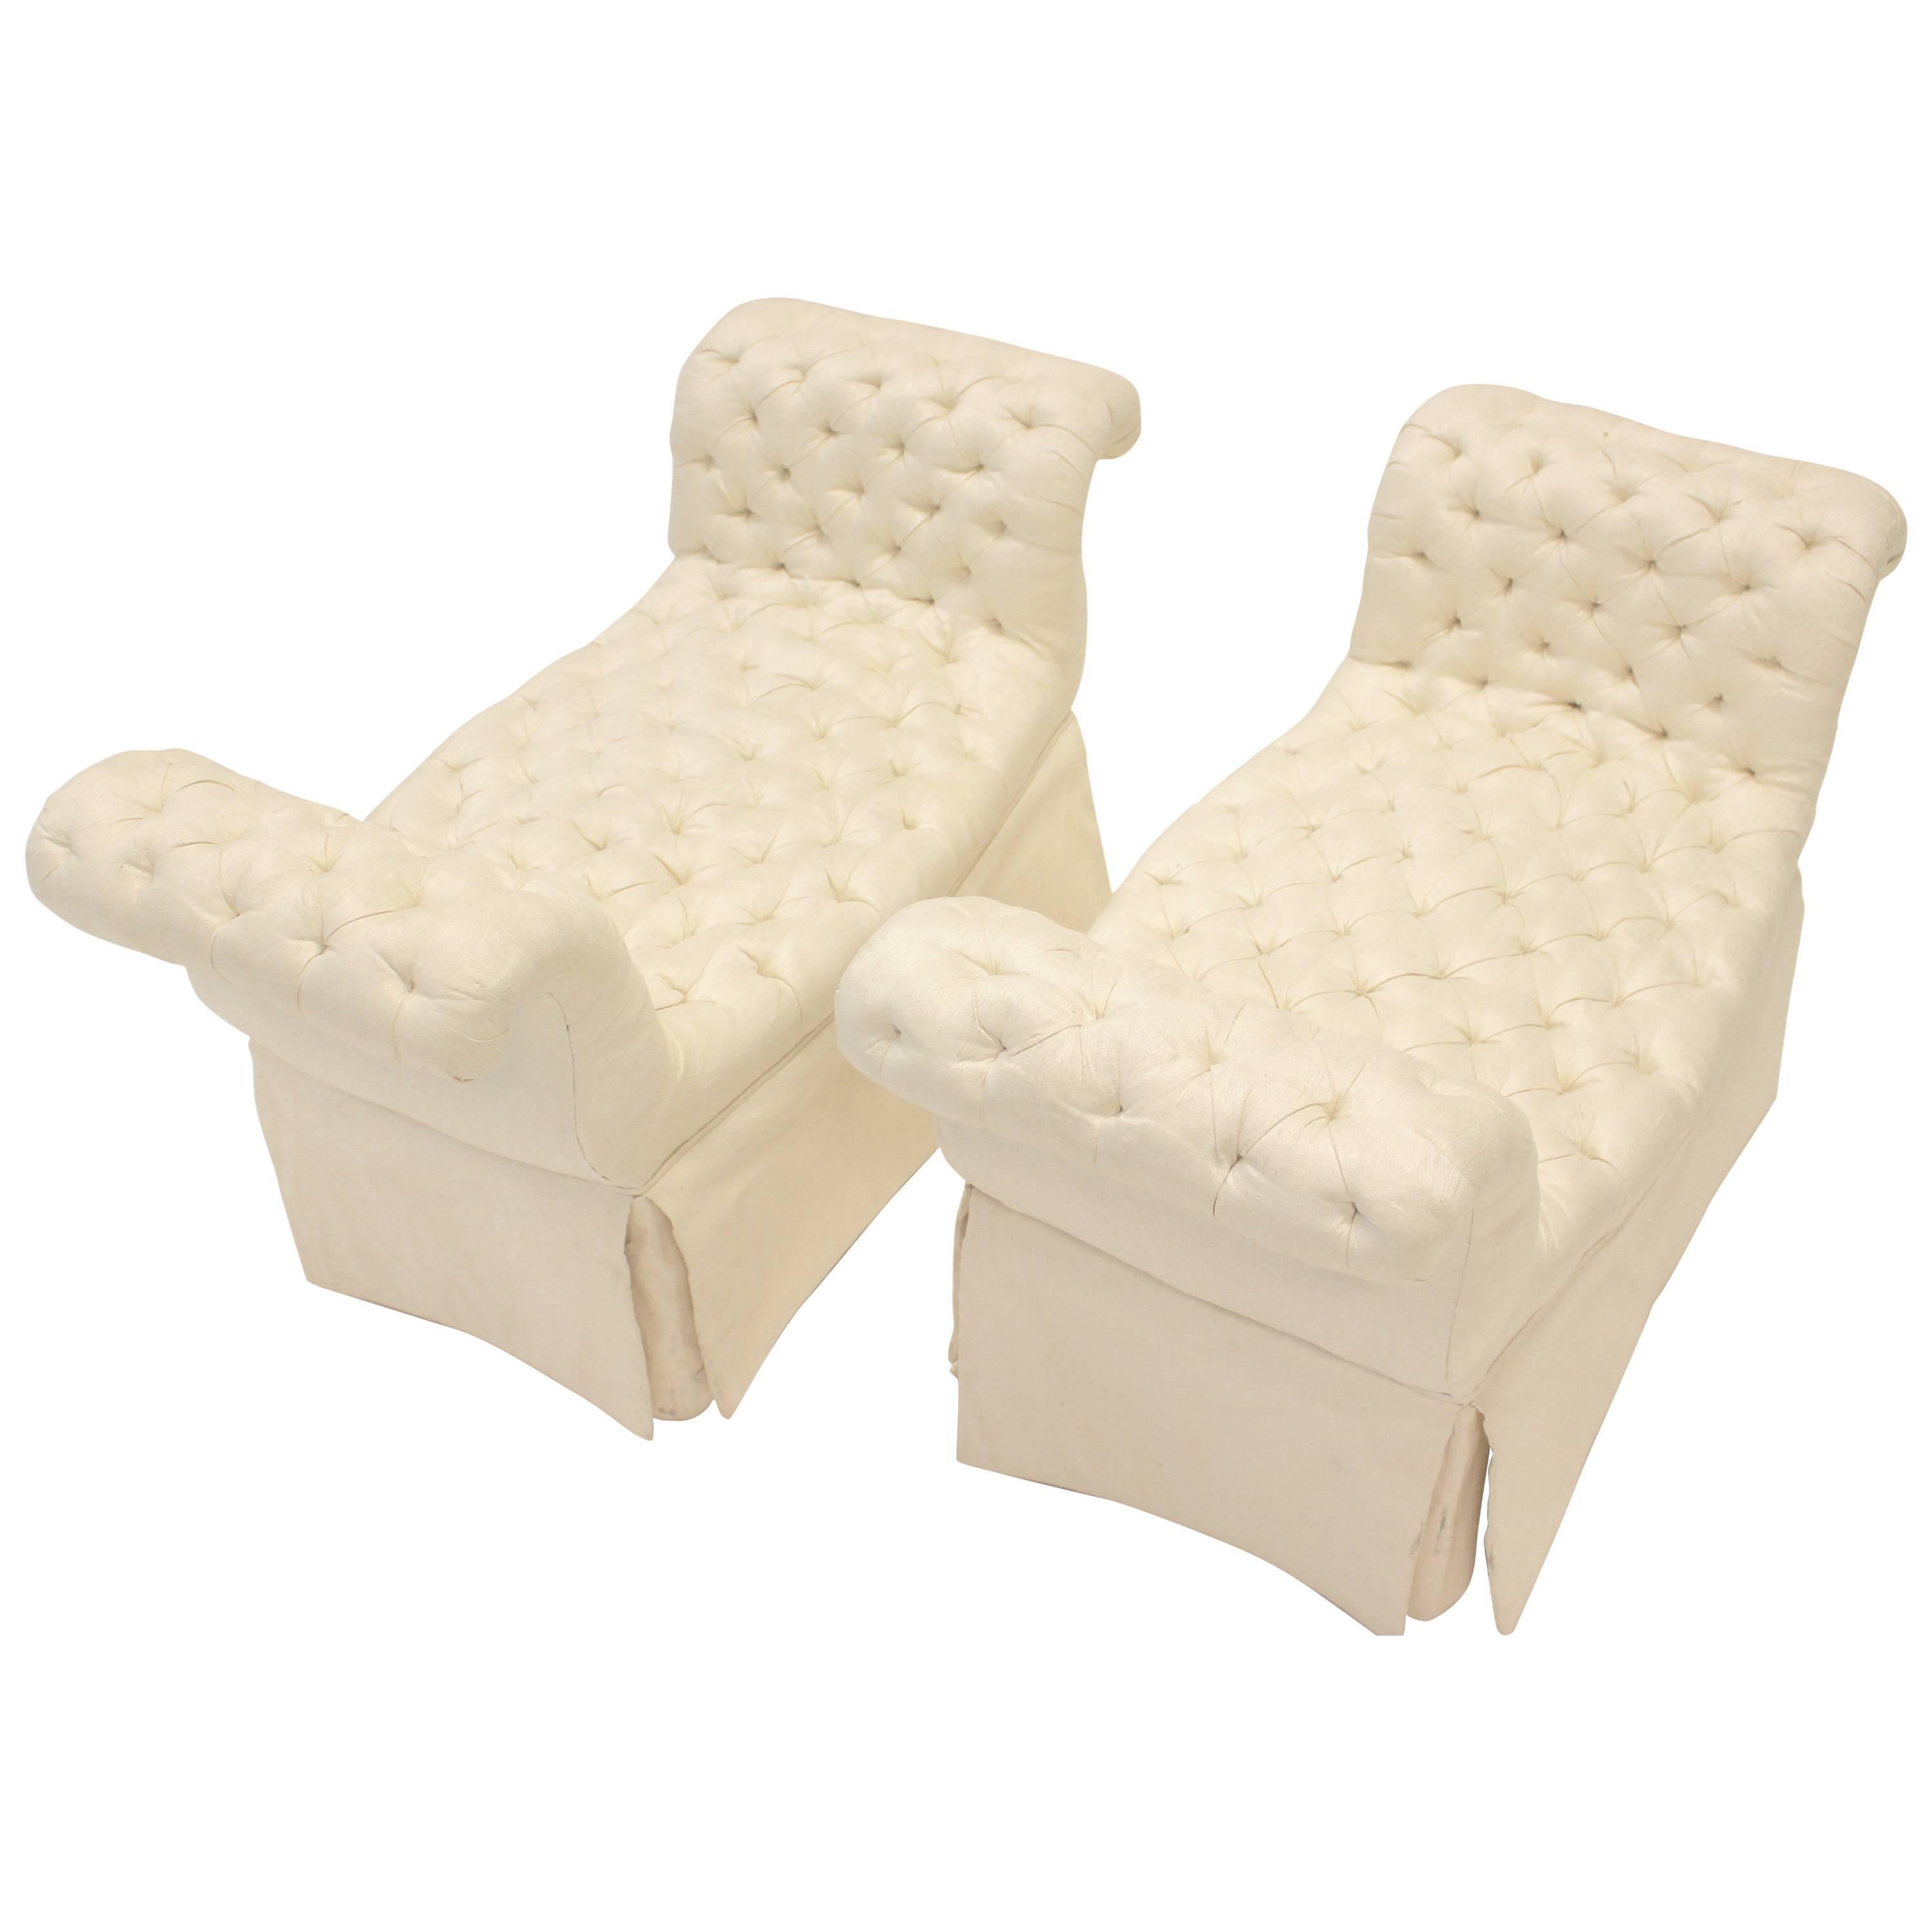 Pair of Cream-Colored Silk Button-Tufted Rolled Arm Benches with Ample Skirt